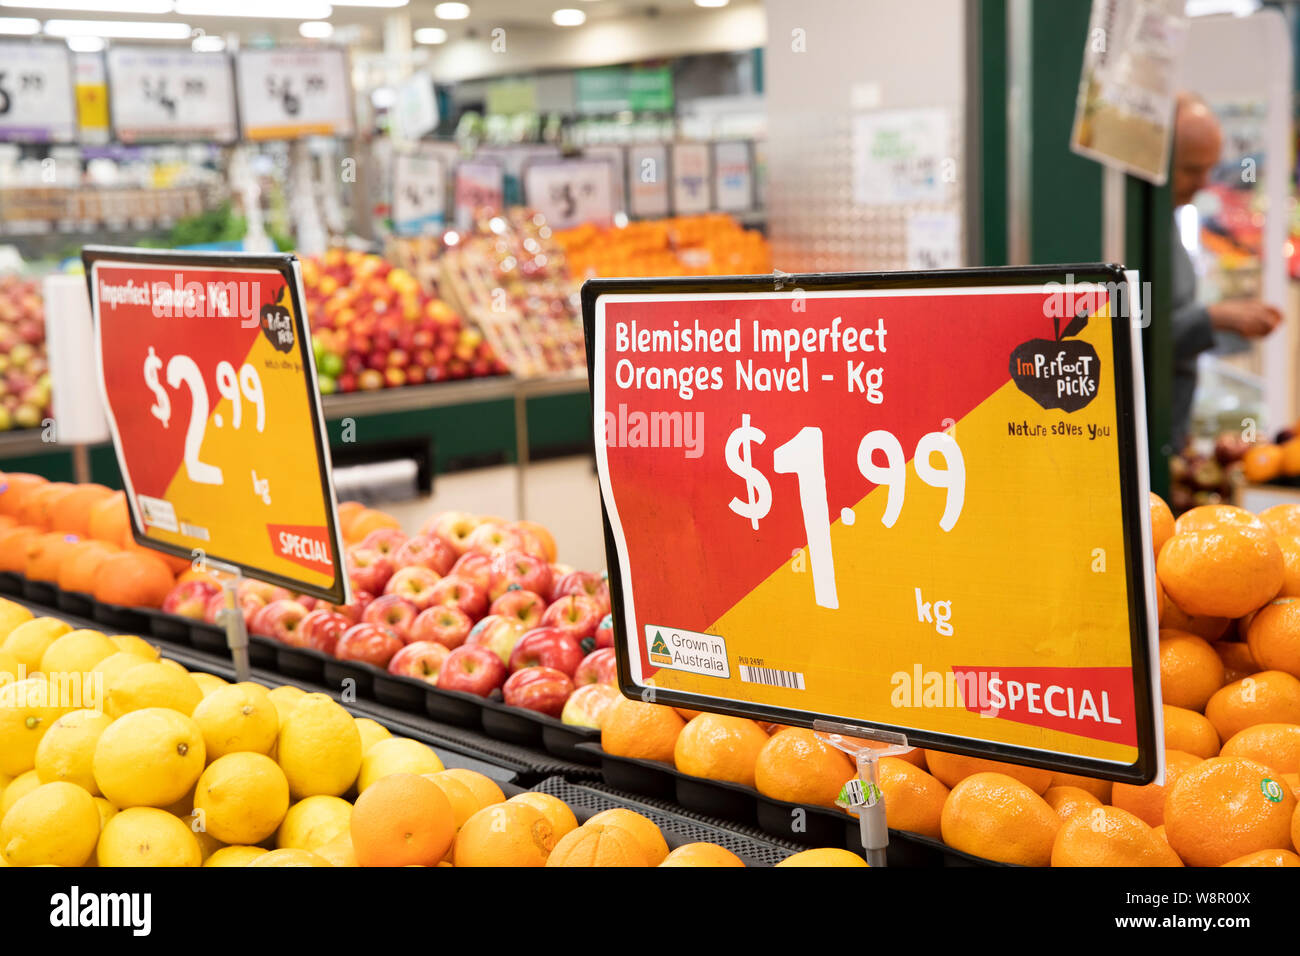 Supermarket Food Waste Is a Big Problem. Is Dynamic Pricing the Solution?